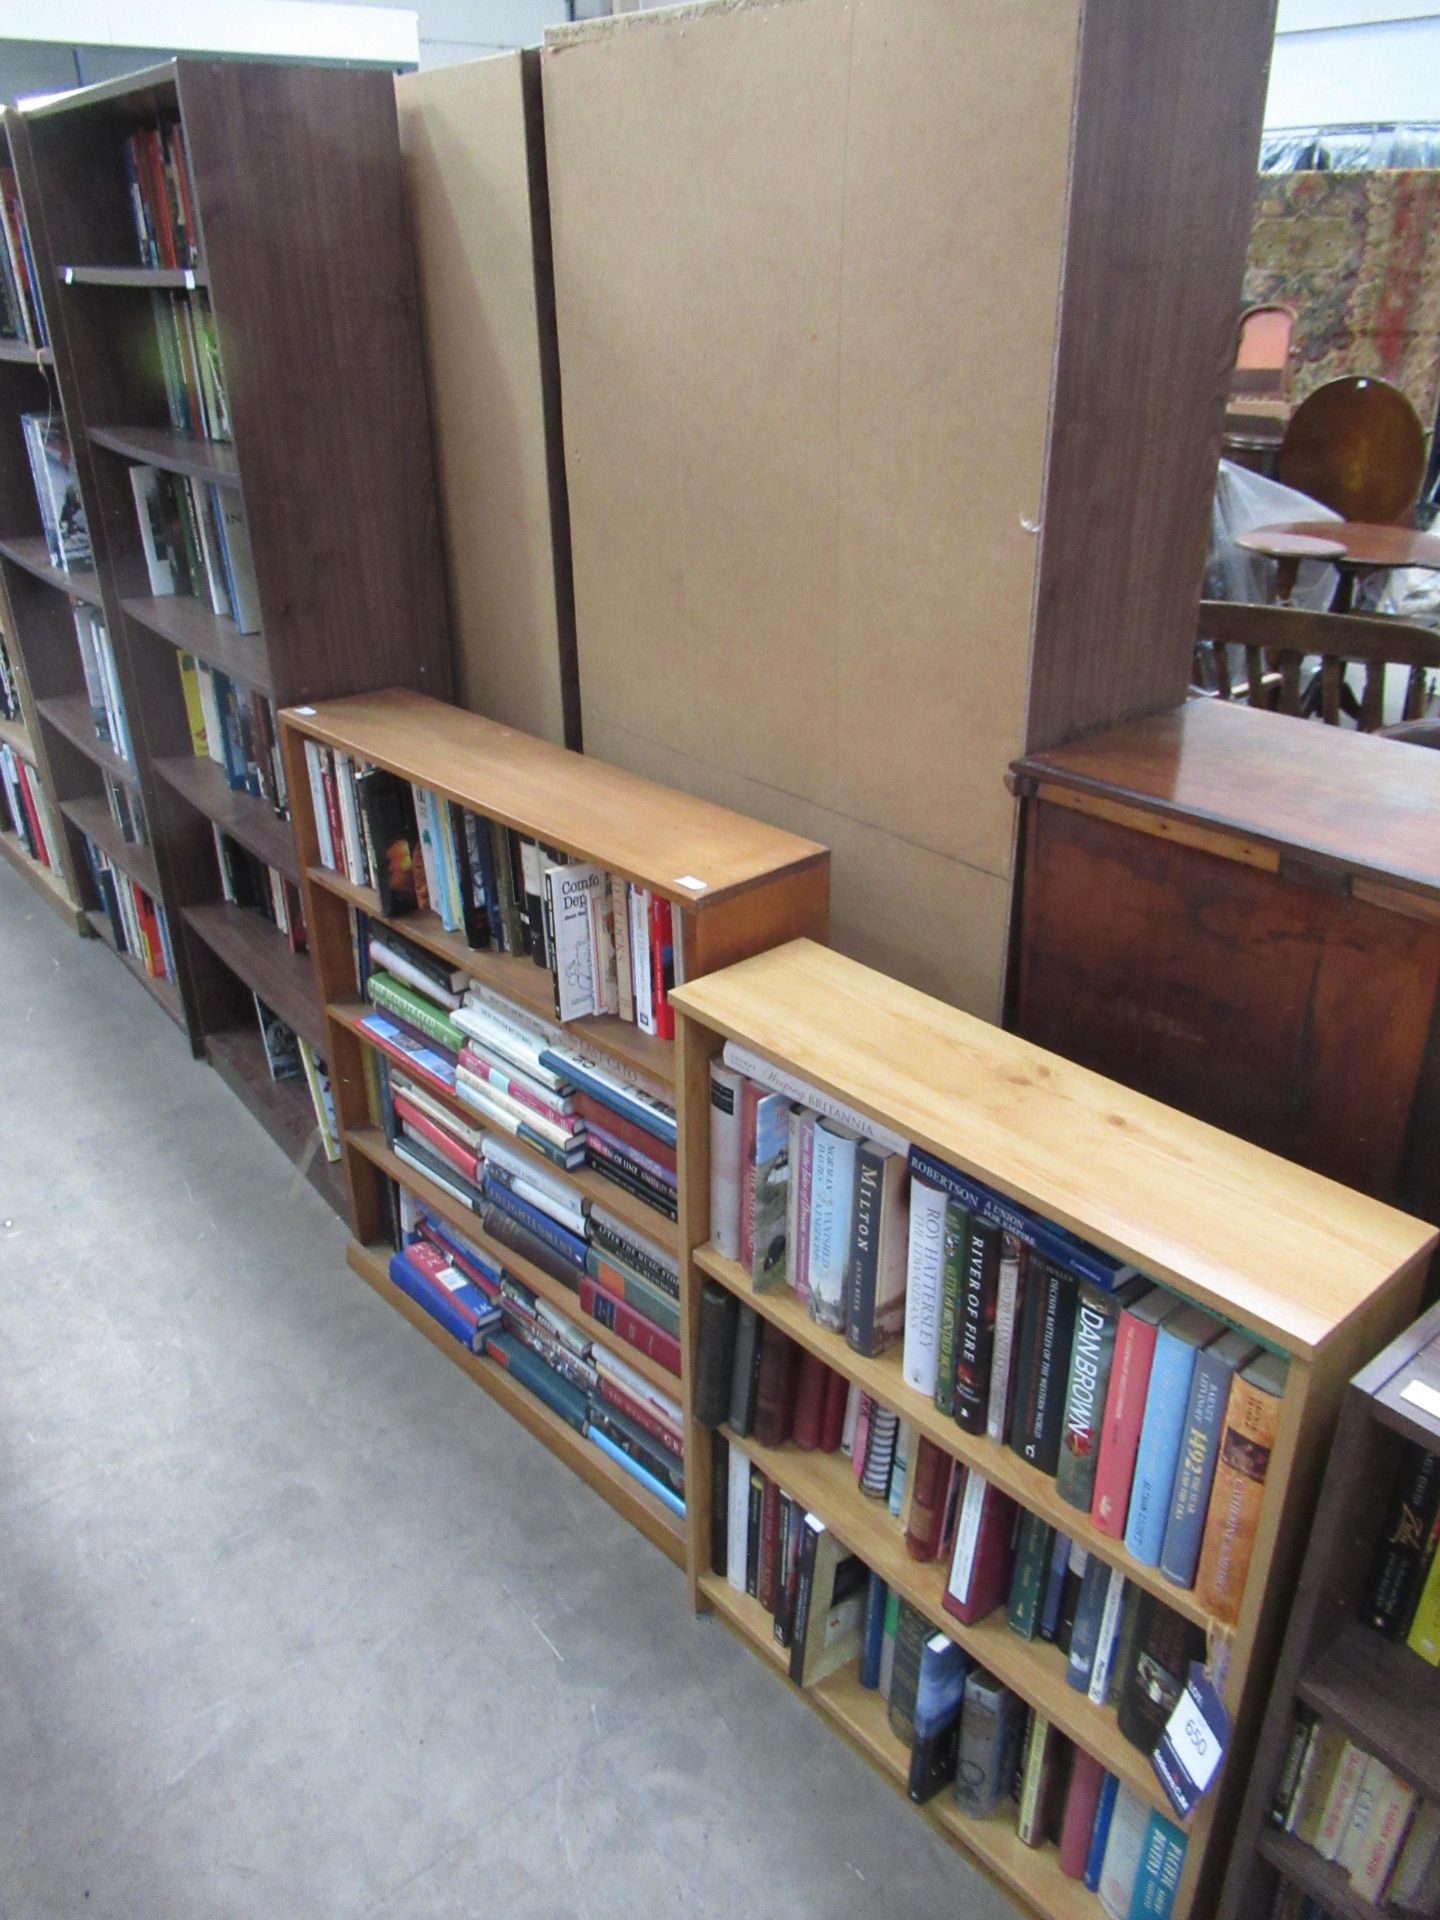 3x Bookcases and cabinates of various themes and subjects including naval, religion, fiction etc als - Image 2 of 15